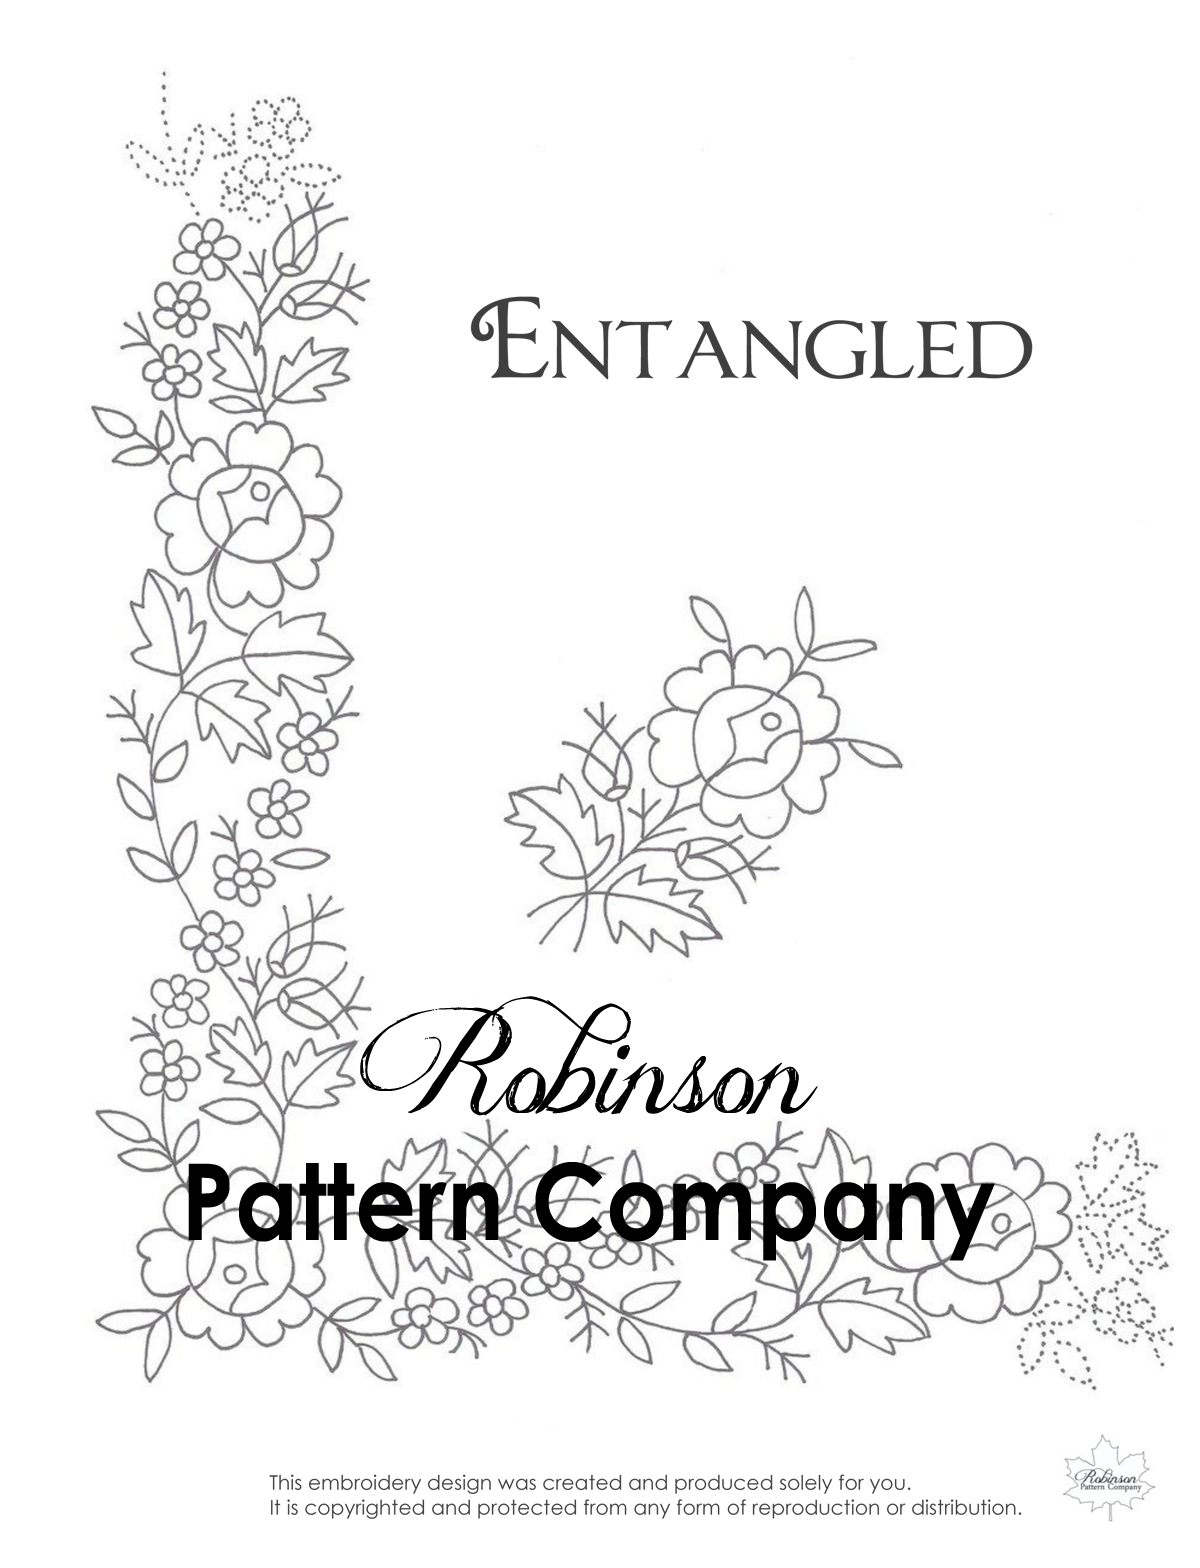 Entangled Hand Embroidery pattern